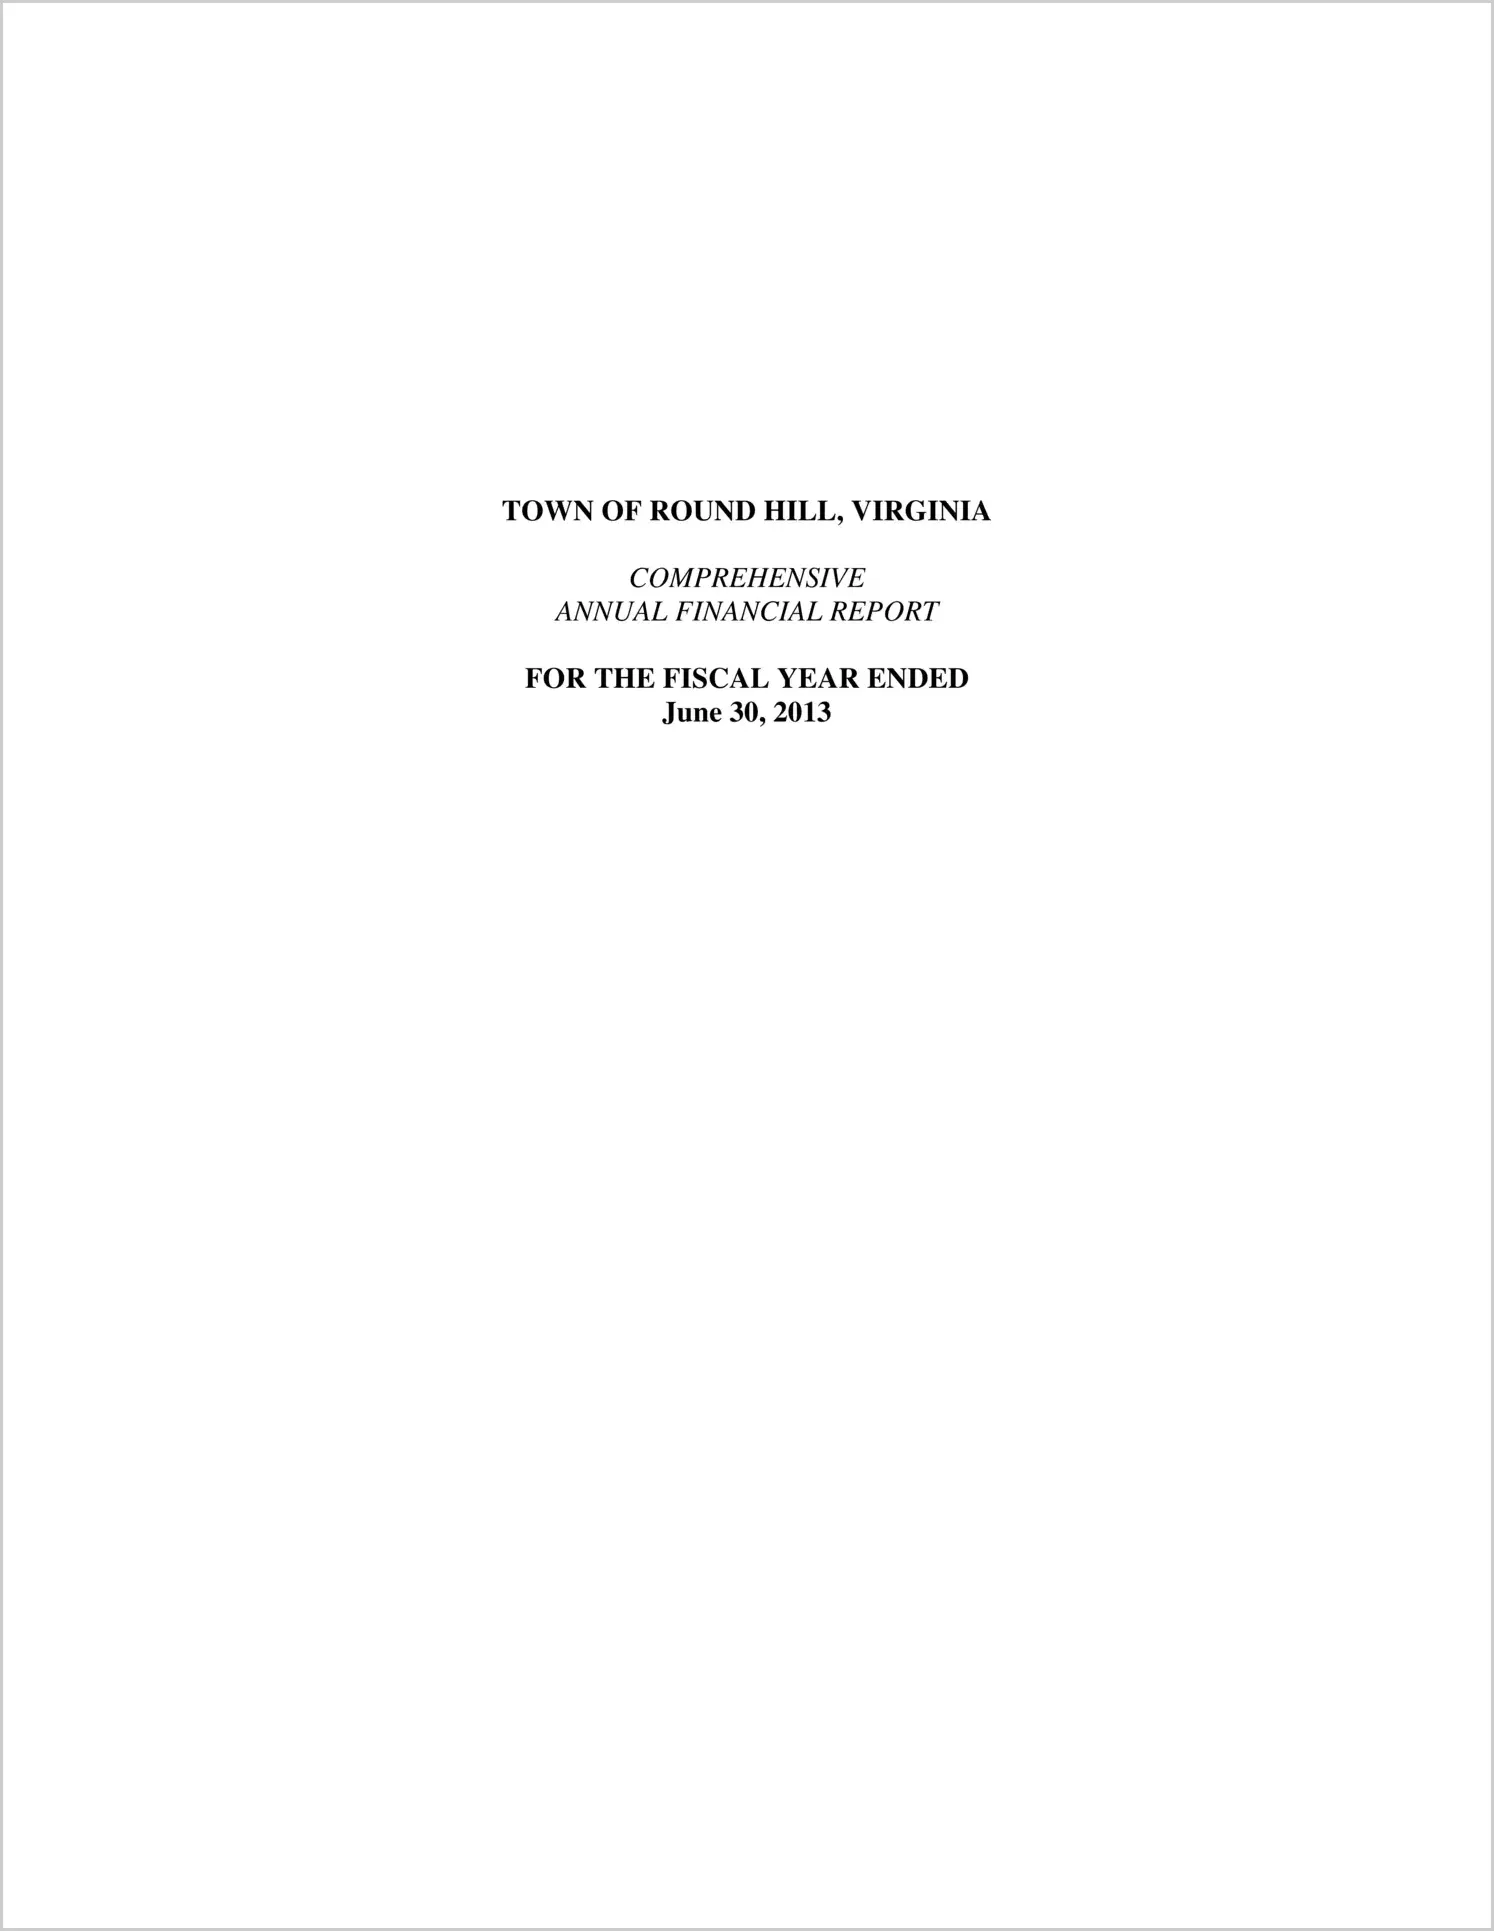 2013 Annual Financial Report for Town of Round Hill